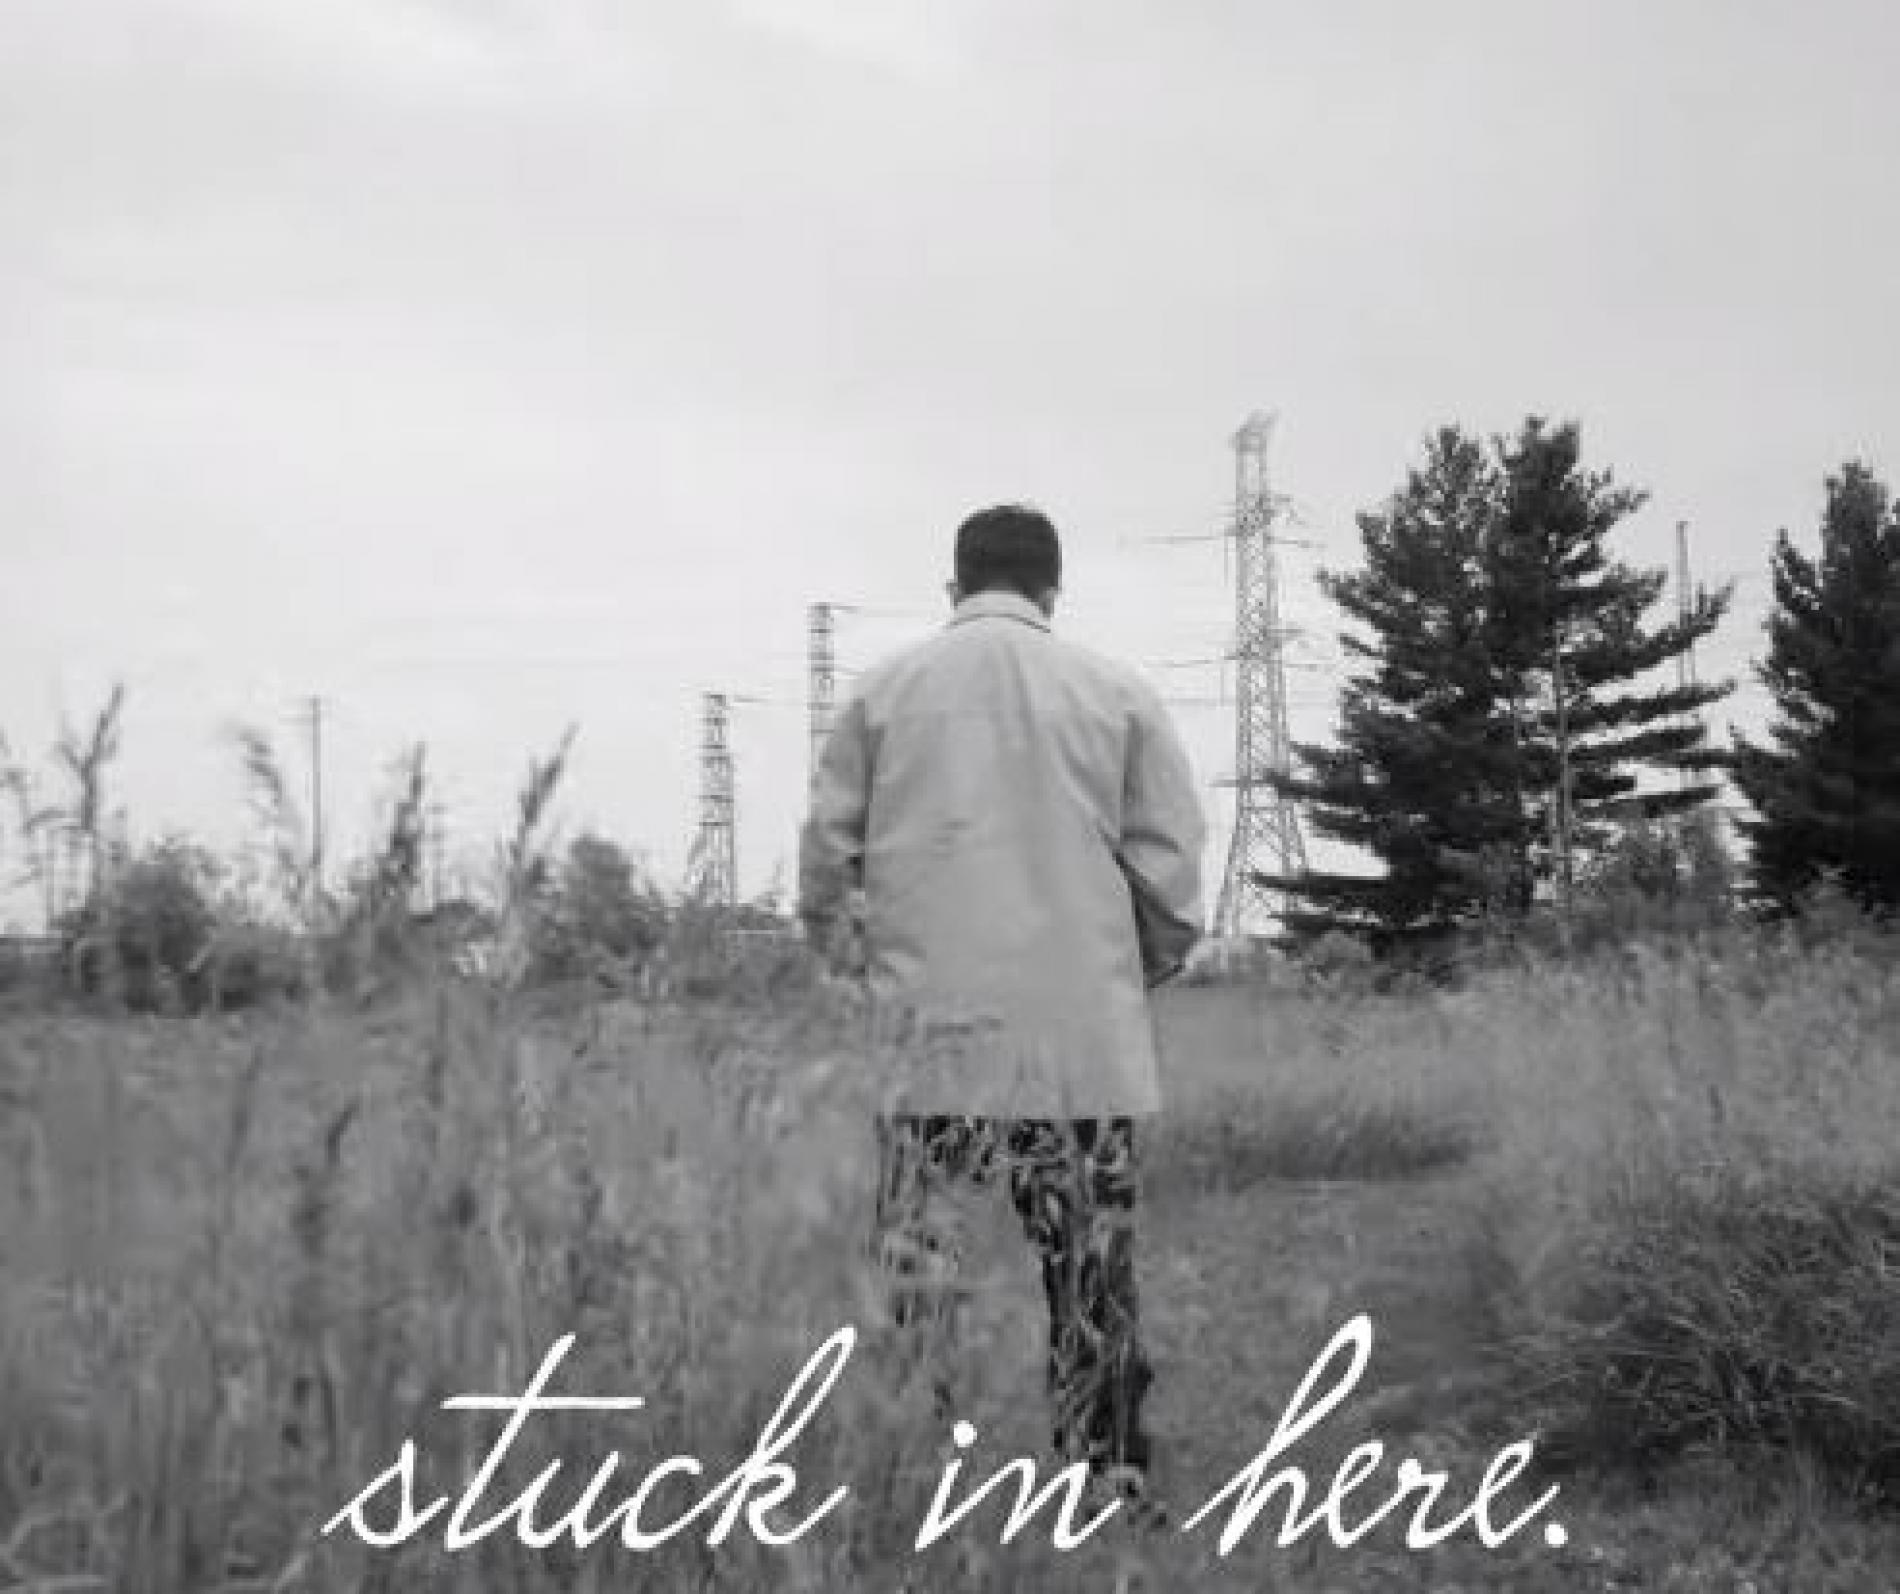 New Music : Doest, Duava – Stuck In Here (Official Music Video)